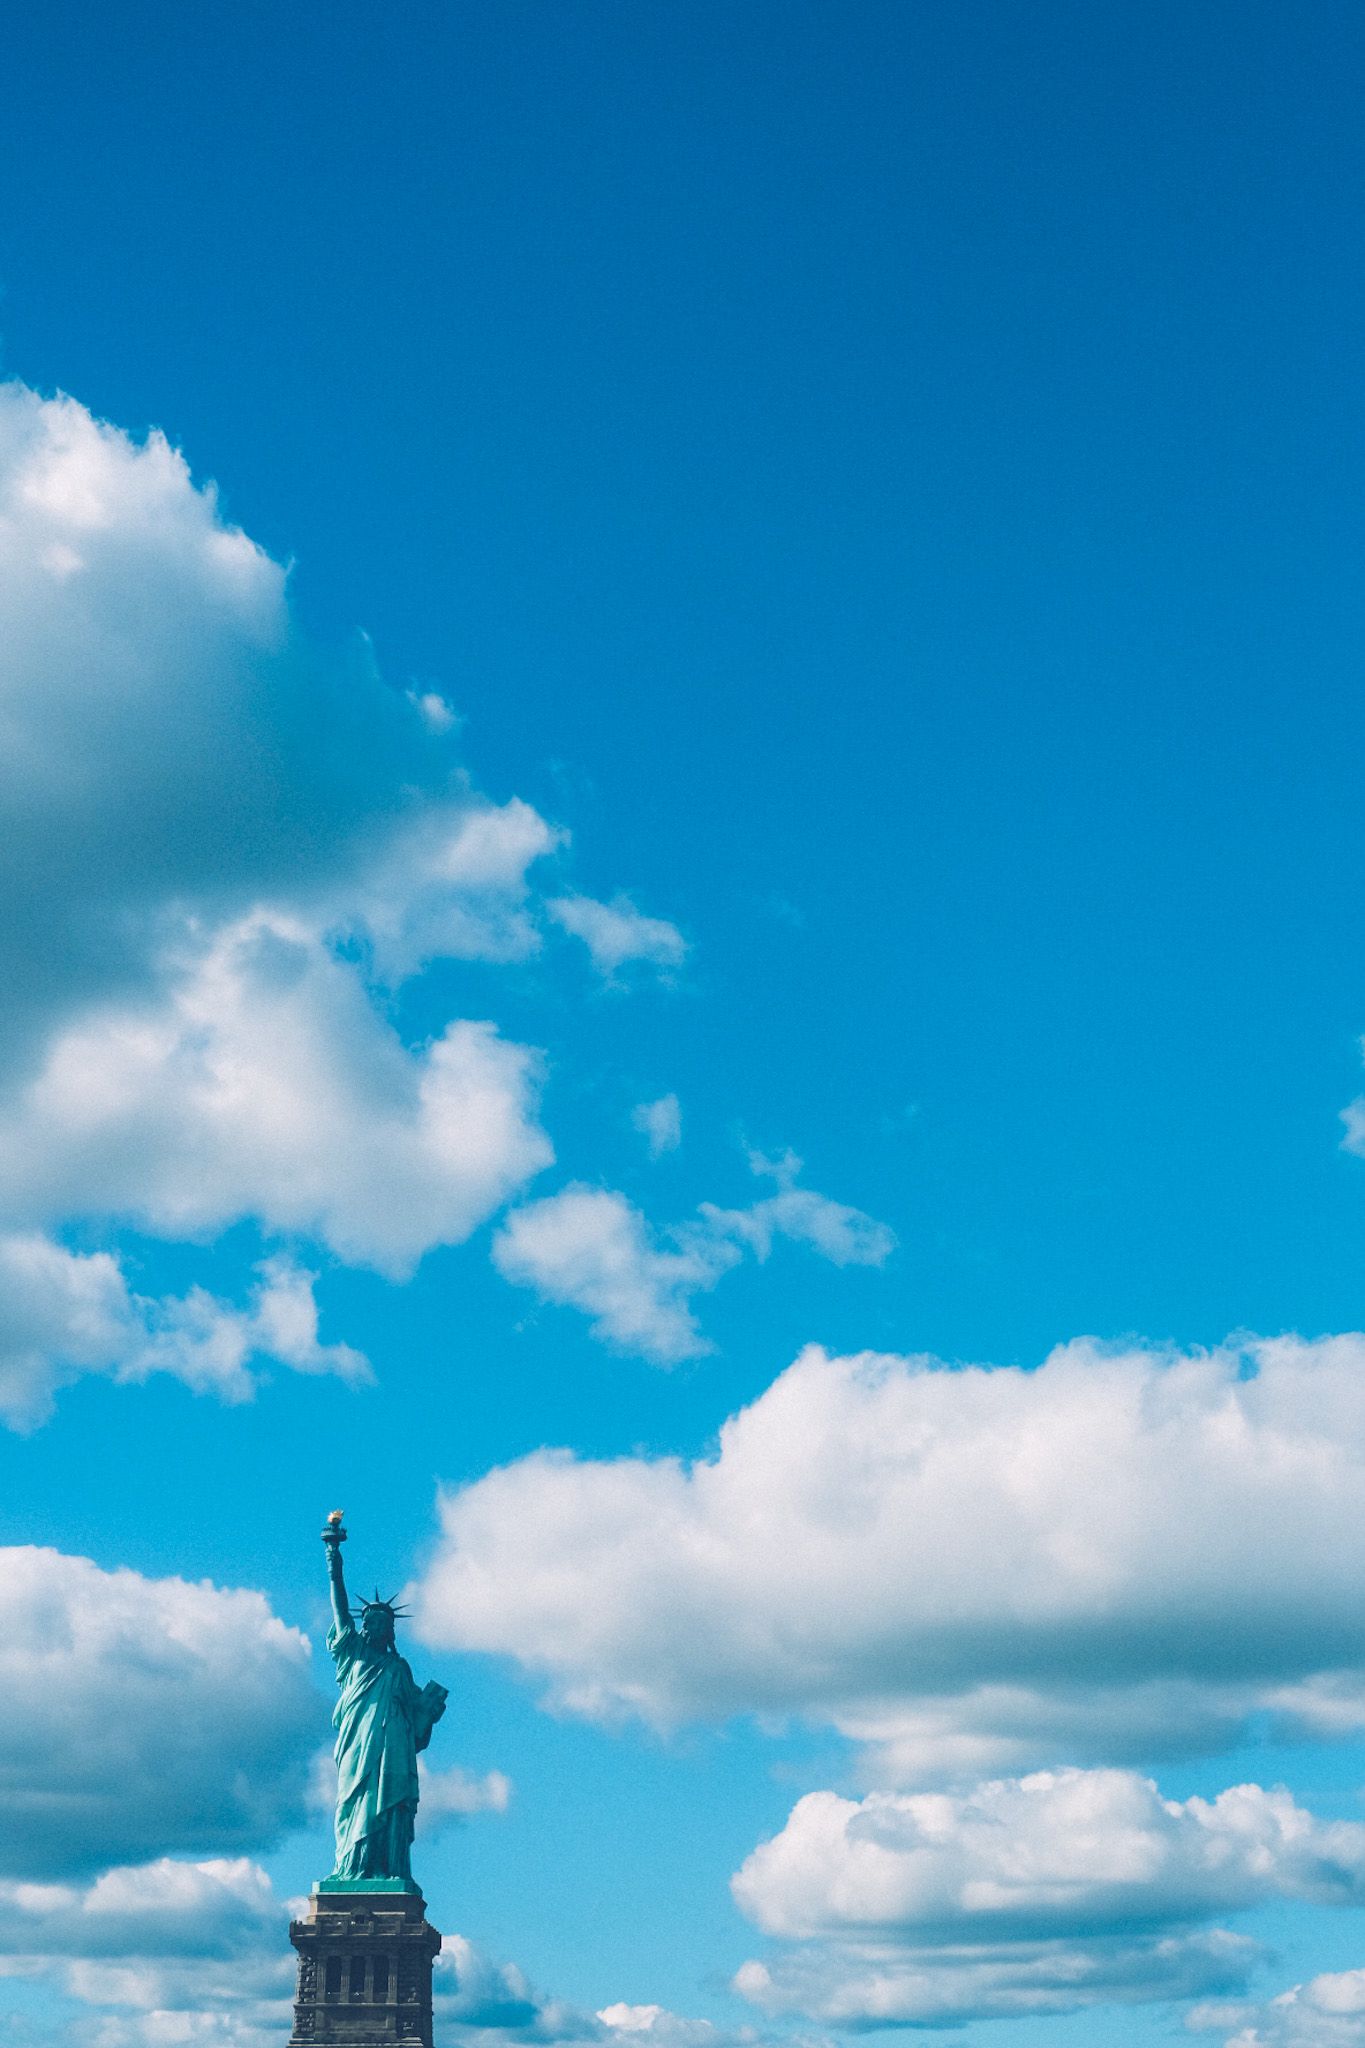 Amid a background of partly cloudy blue sky sits the Statue of Liberty, rising small from the bottom left corner.